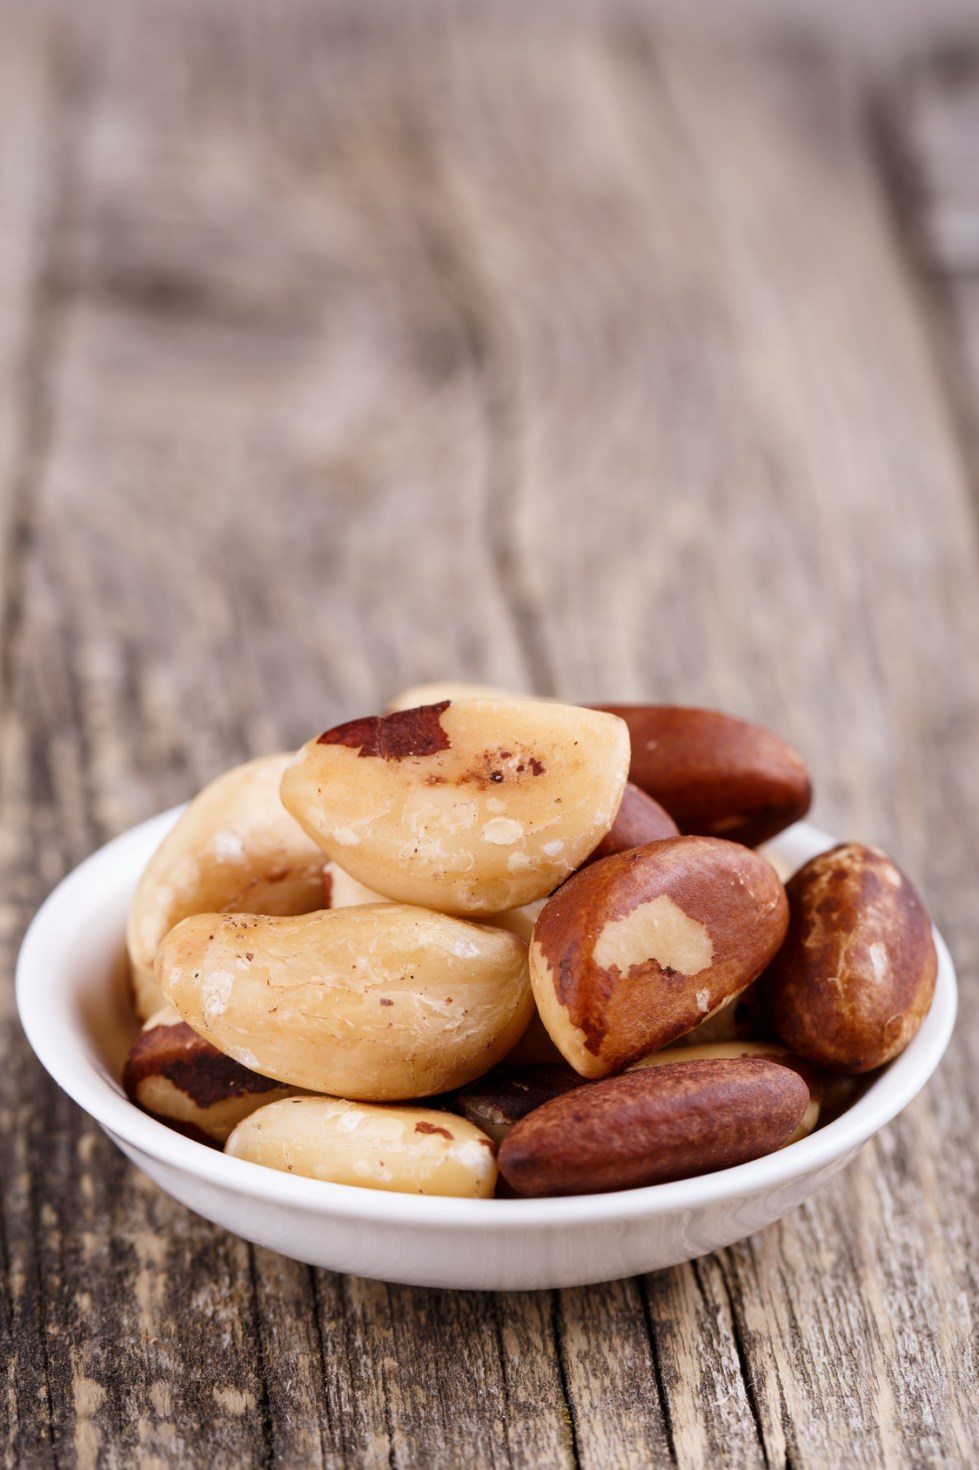 Brazil nuts on a spoon on wooden background.